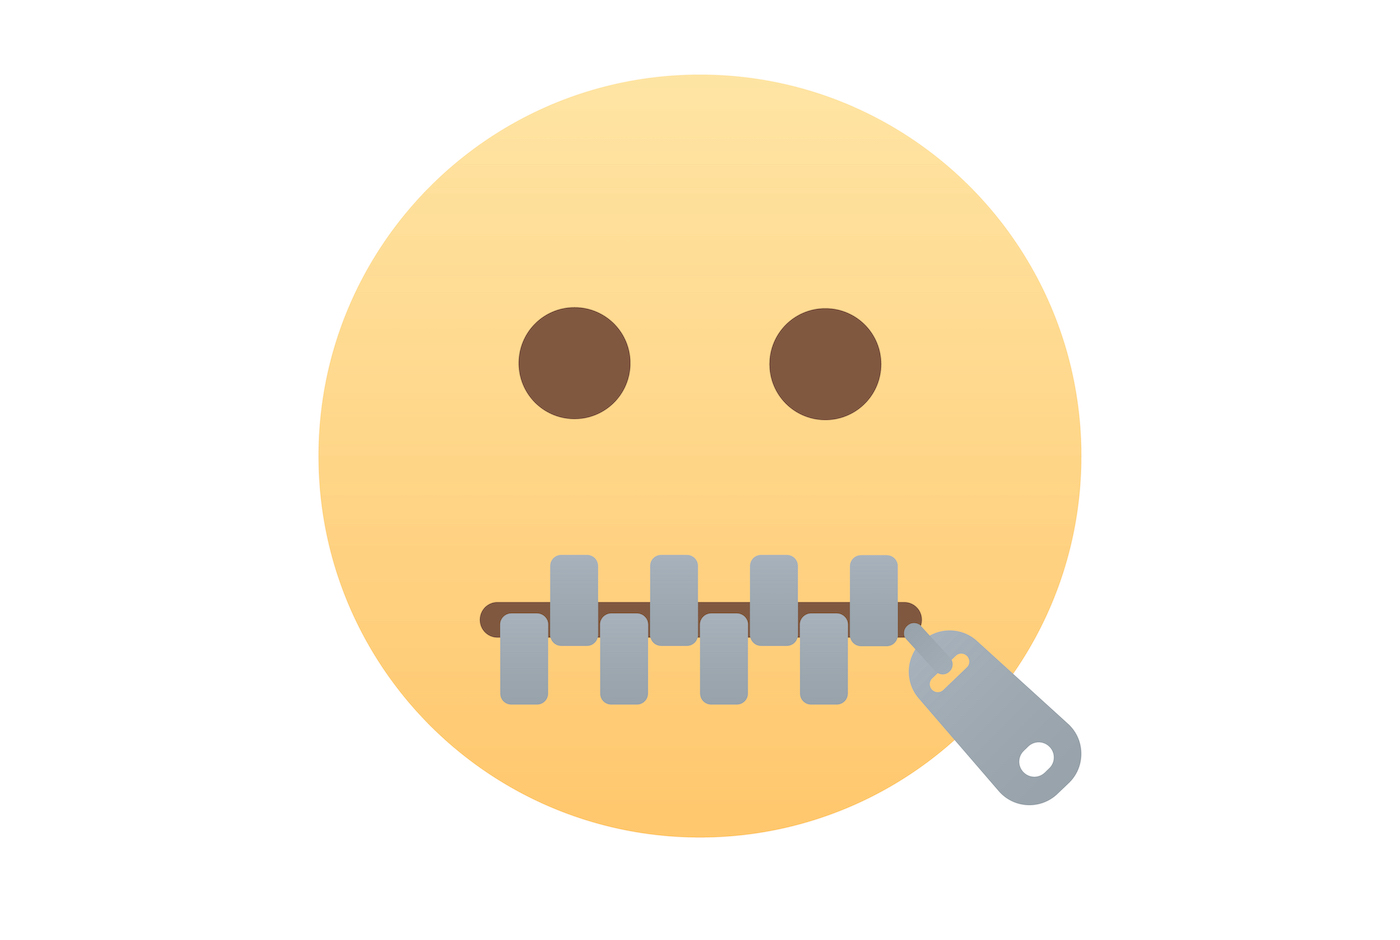 Flat Design Smiley Face with zipped lips